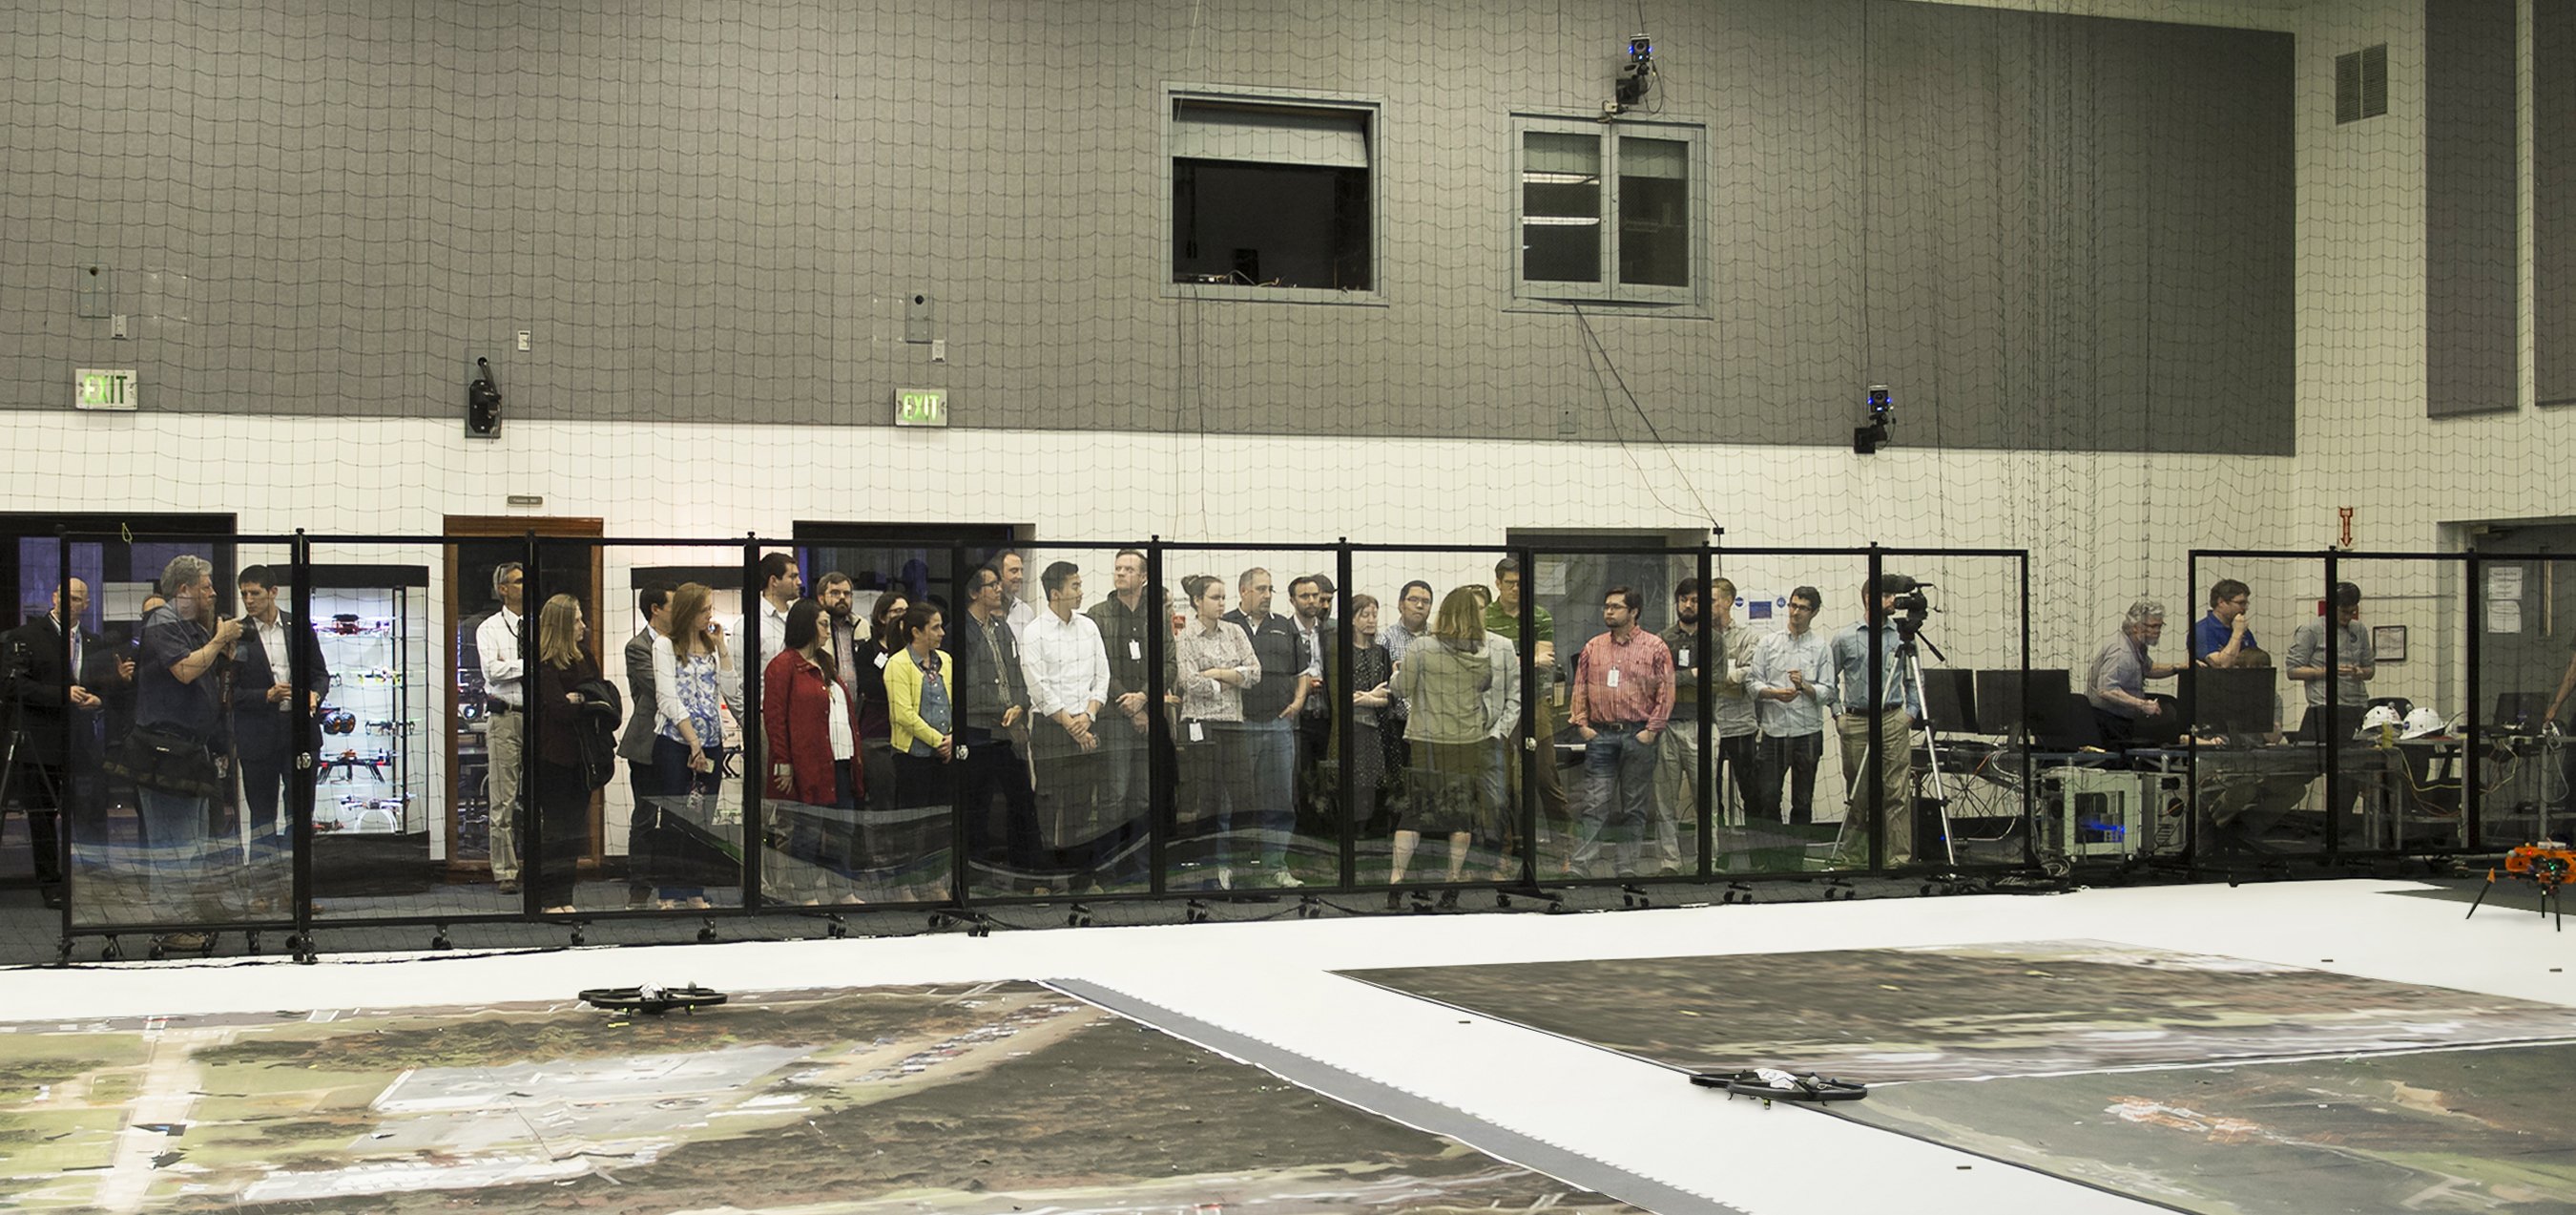 NASA drone testing facility shields spectators with a wall of clear room dividers